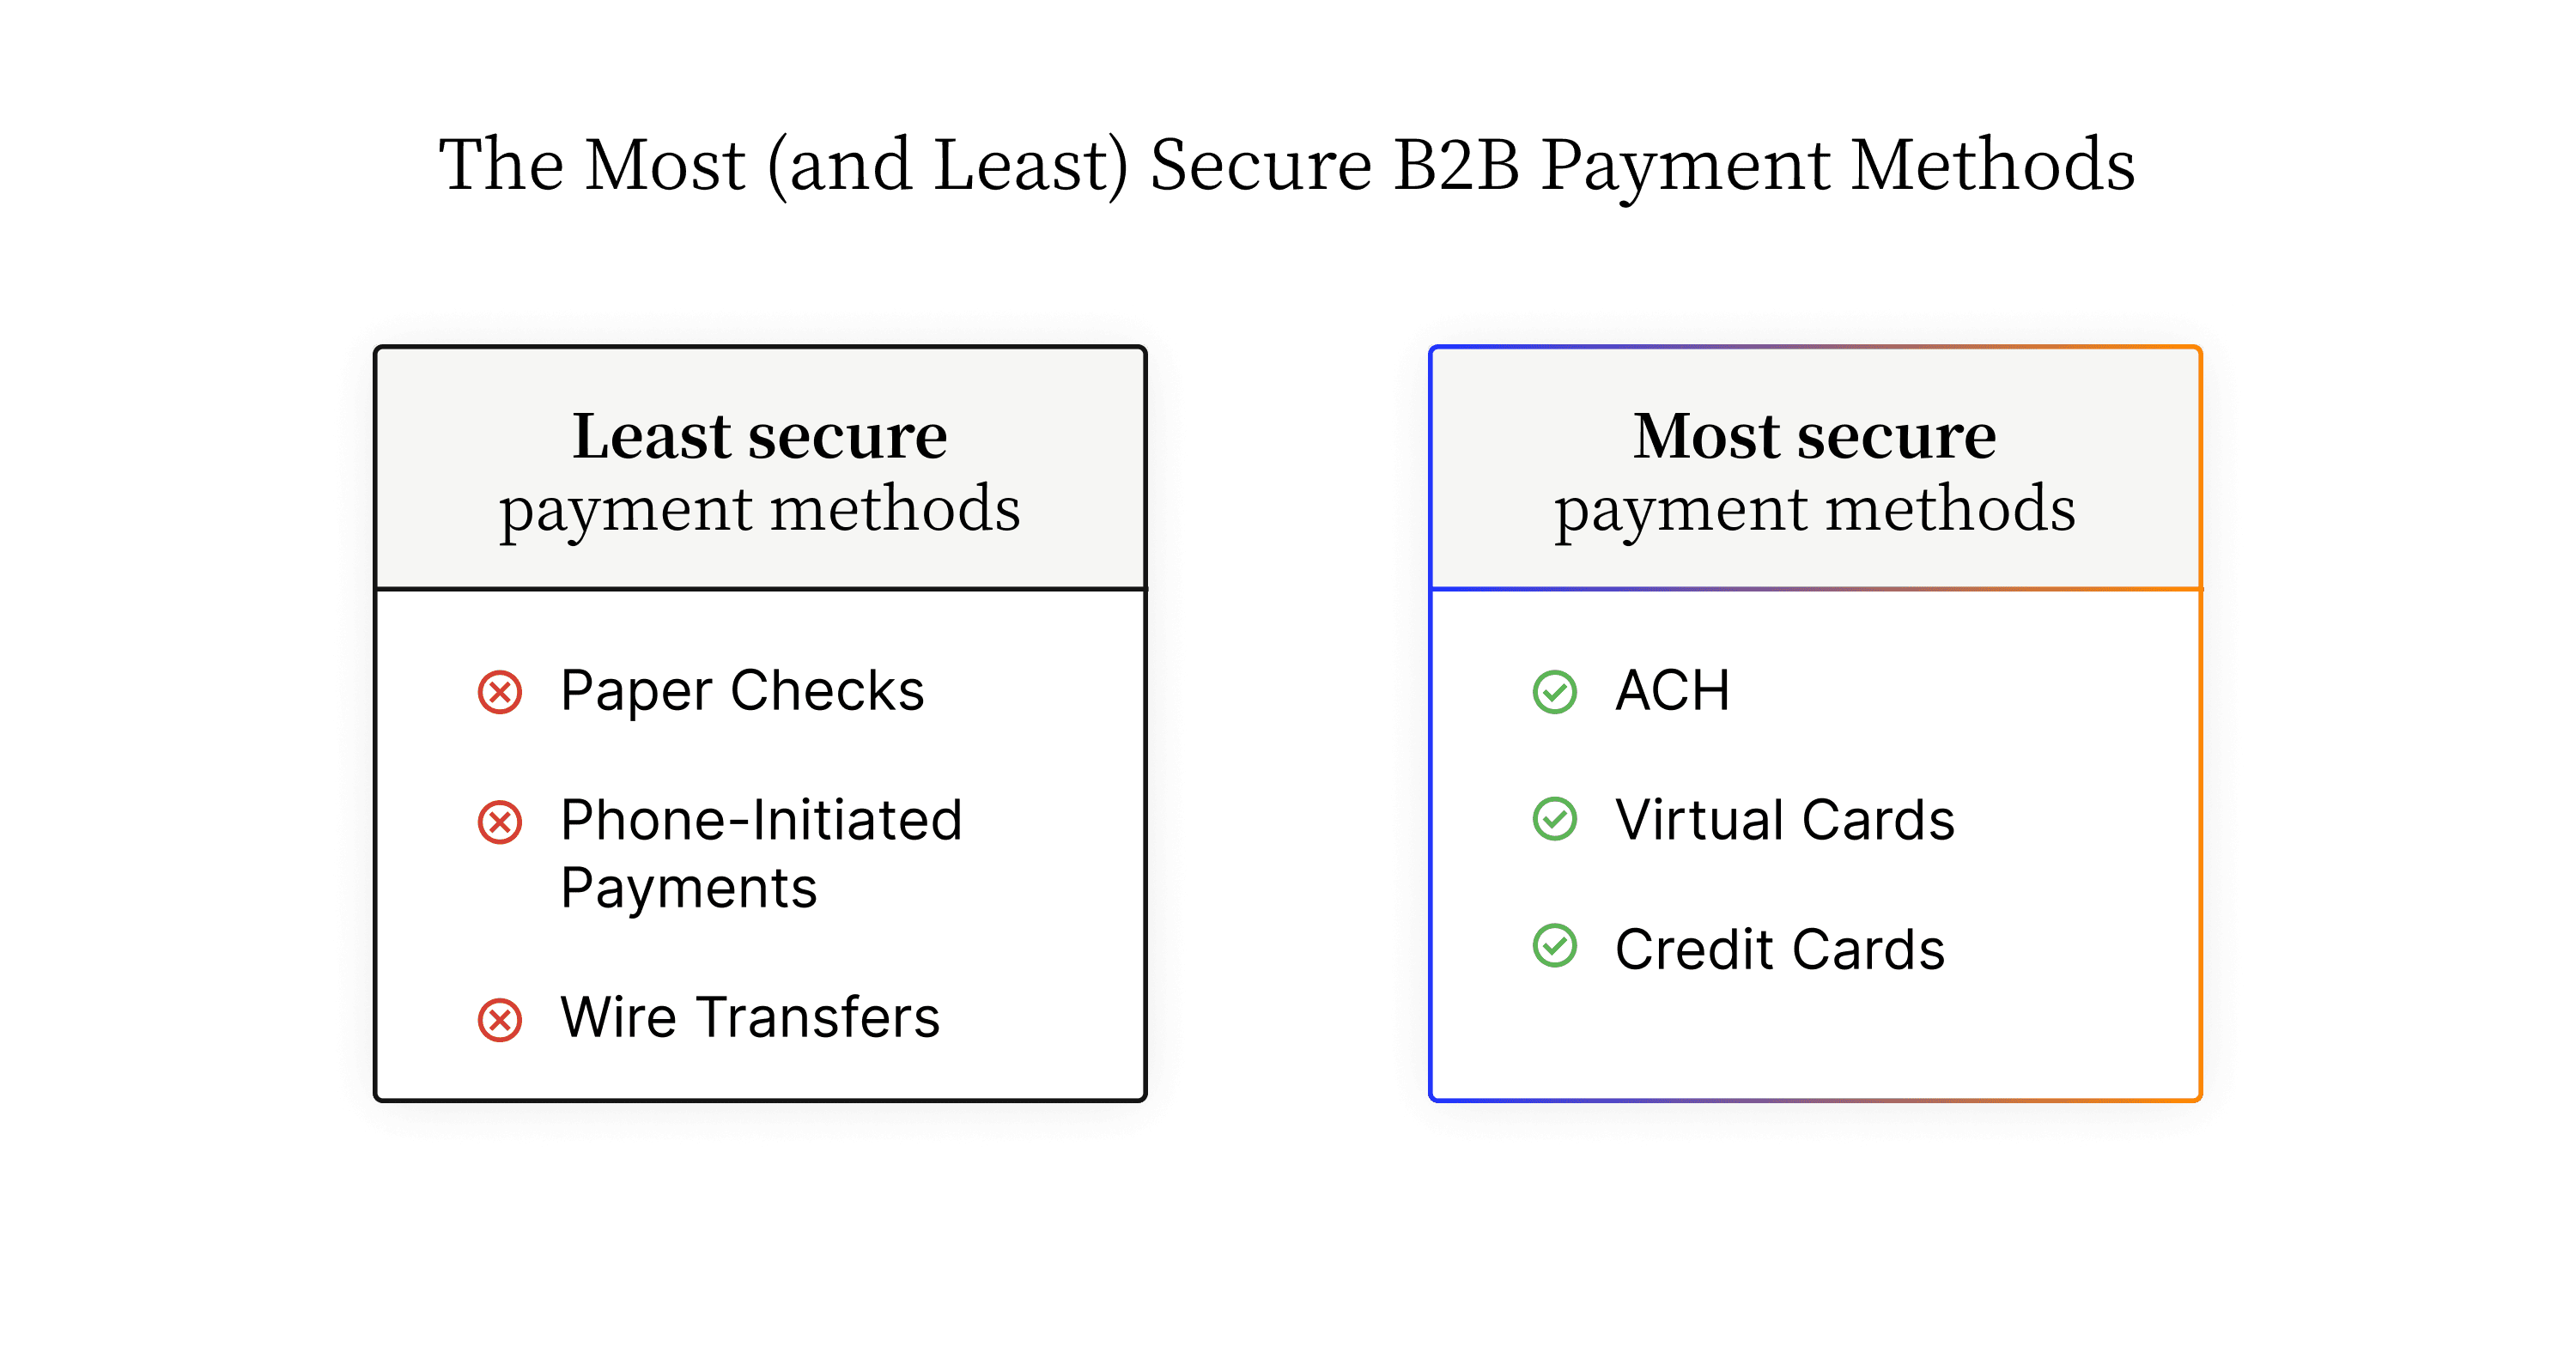 The most and least secure B2B payment methods